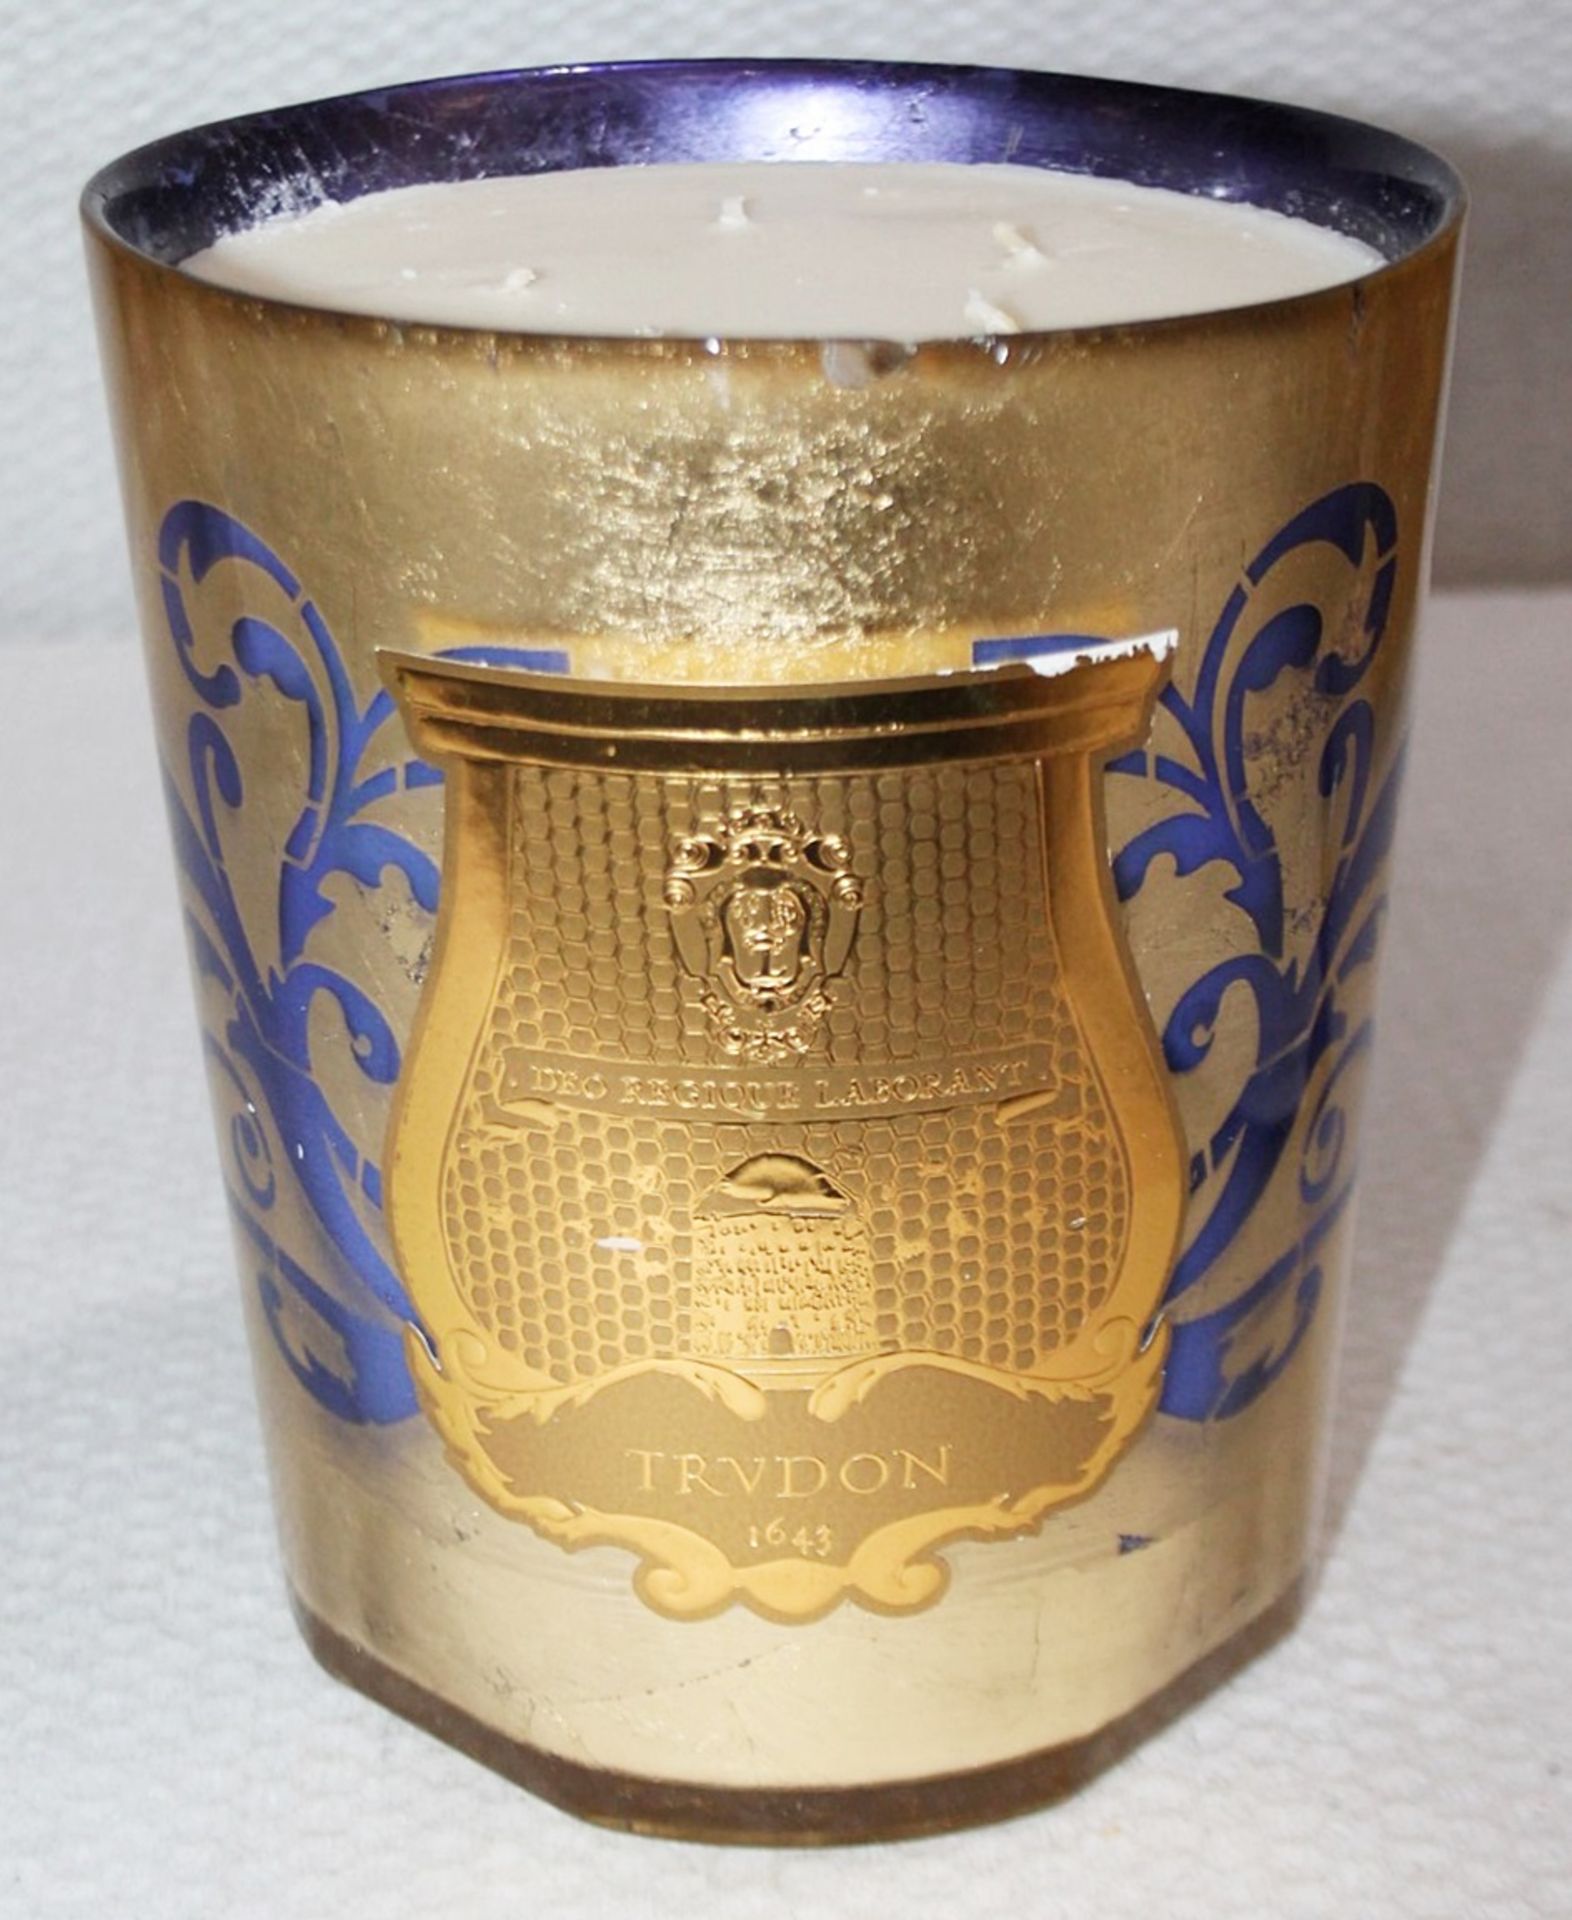 1 x CIRE TRUDON 'Christmas Fir' Great Candle (800g) - Original Price £550.00 - Unused Boxed - Image 3 of 9